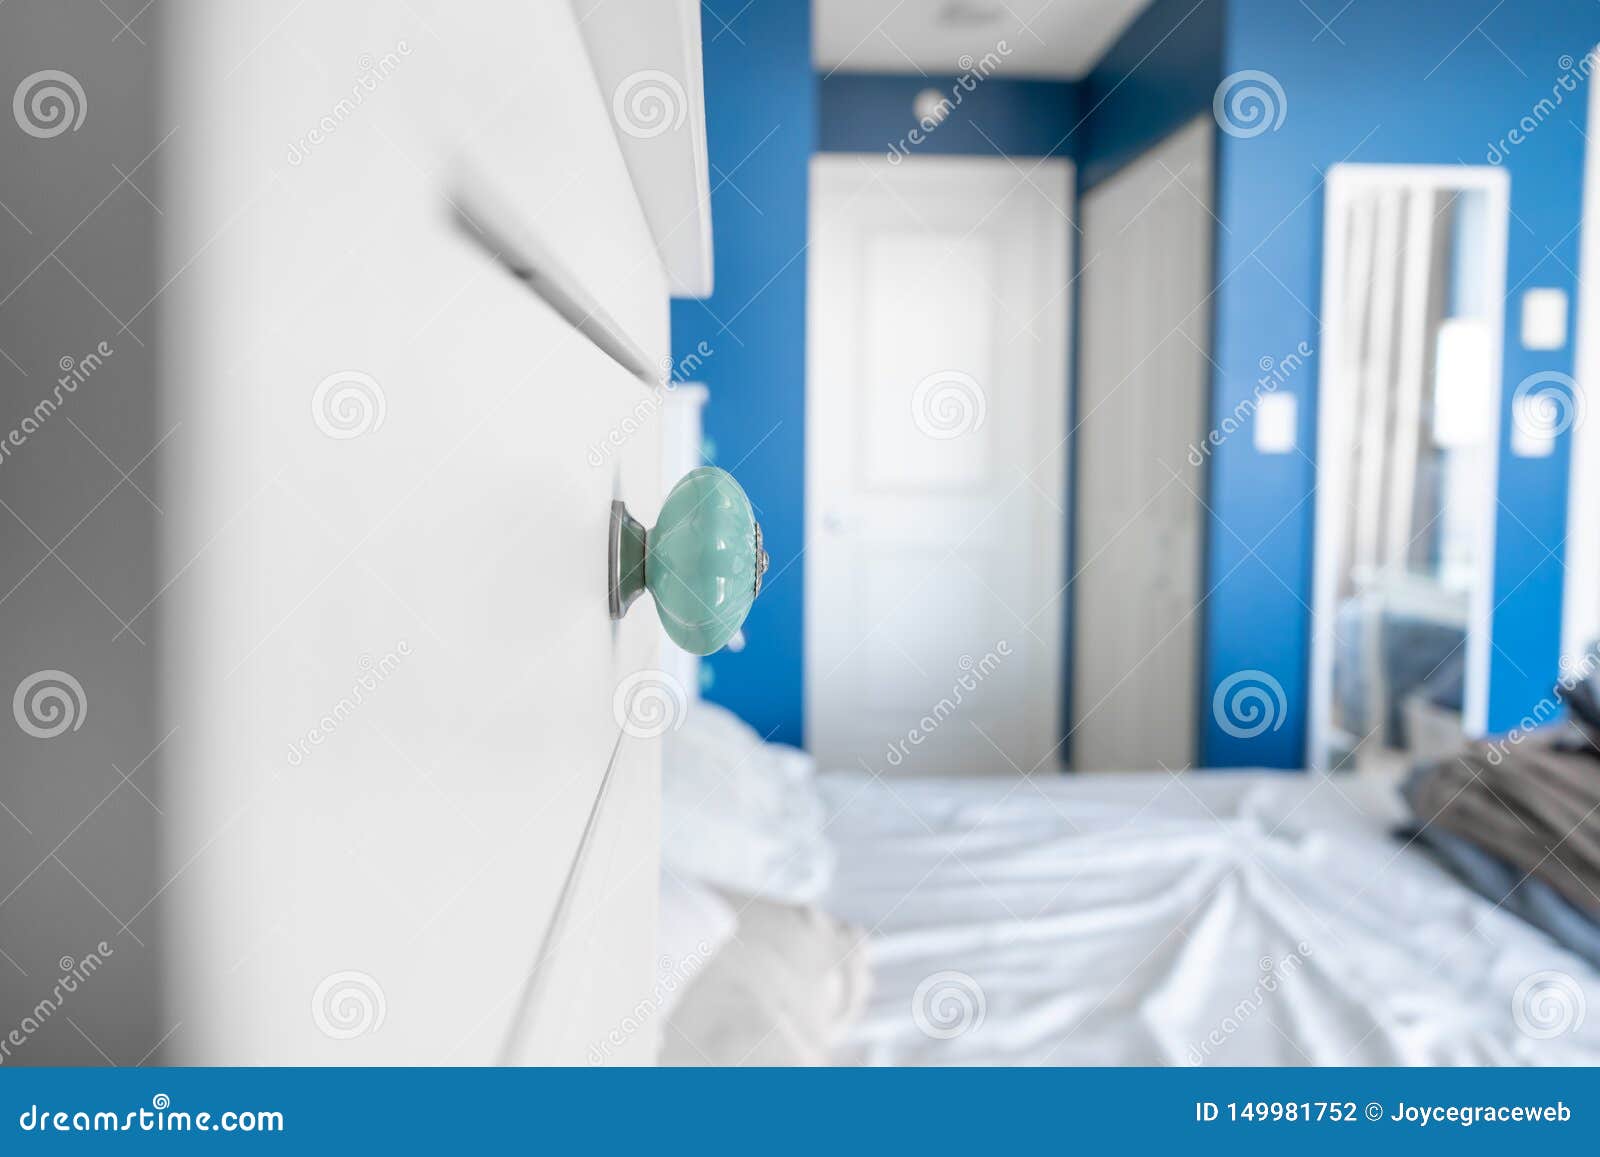 Perspective View Of A Bedroom Showing A Dresser Knob Blue Painted